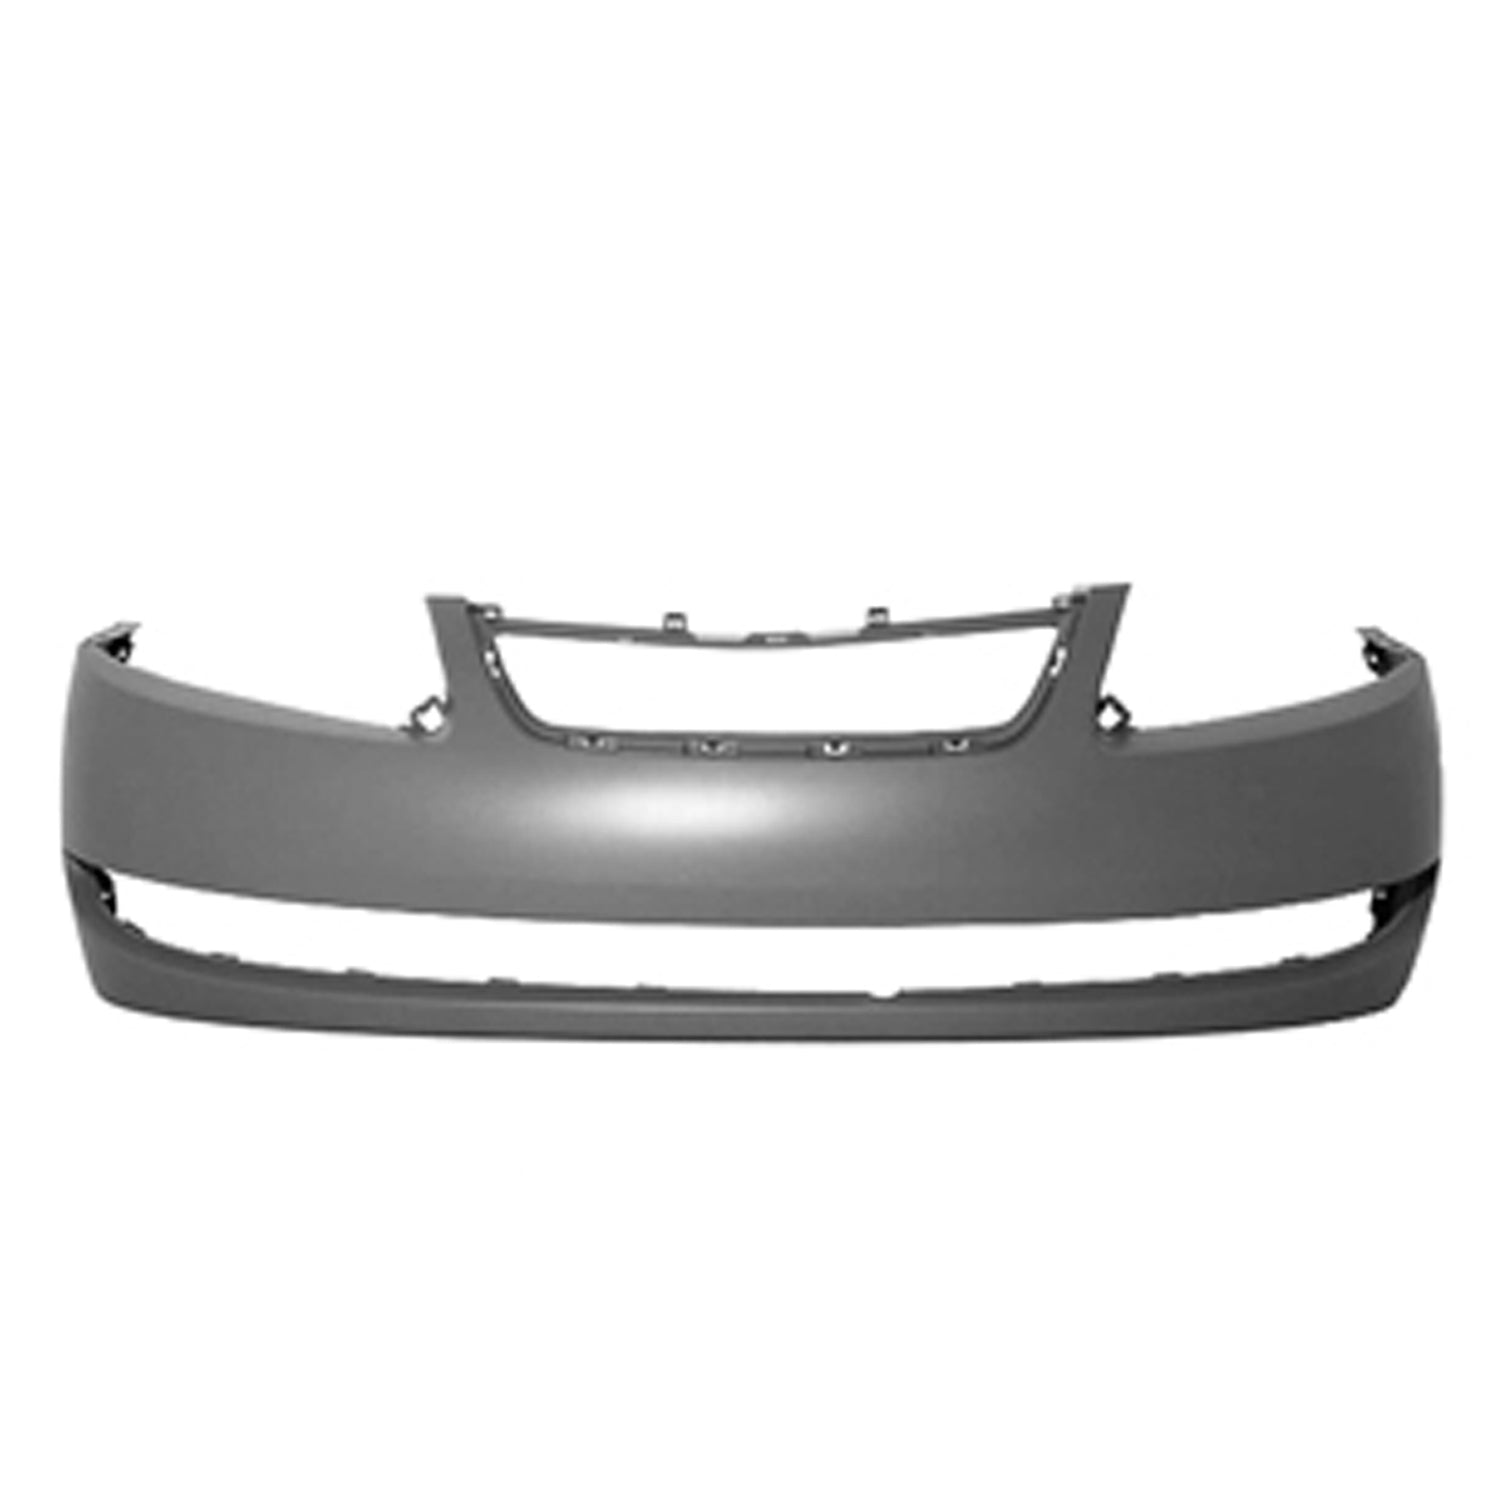 Front bumper cover 2005 - 2007 SATURN ION  GM1000754 15824780